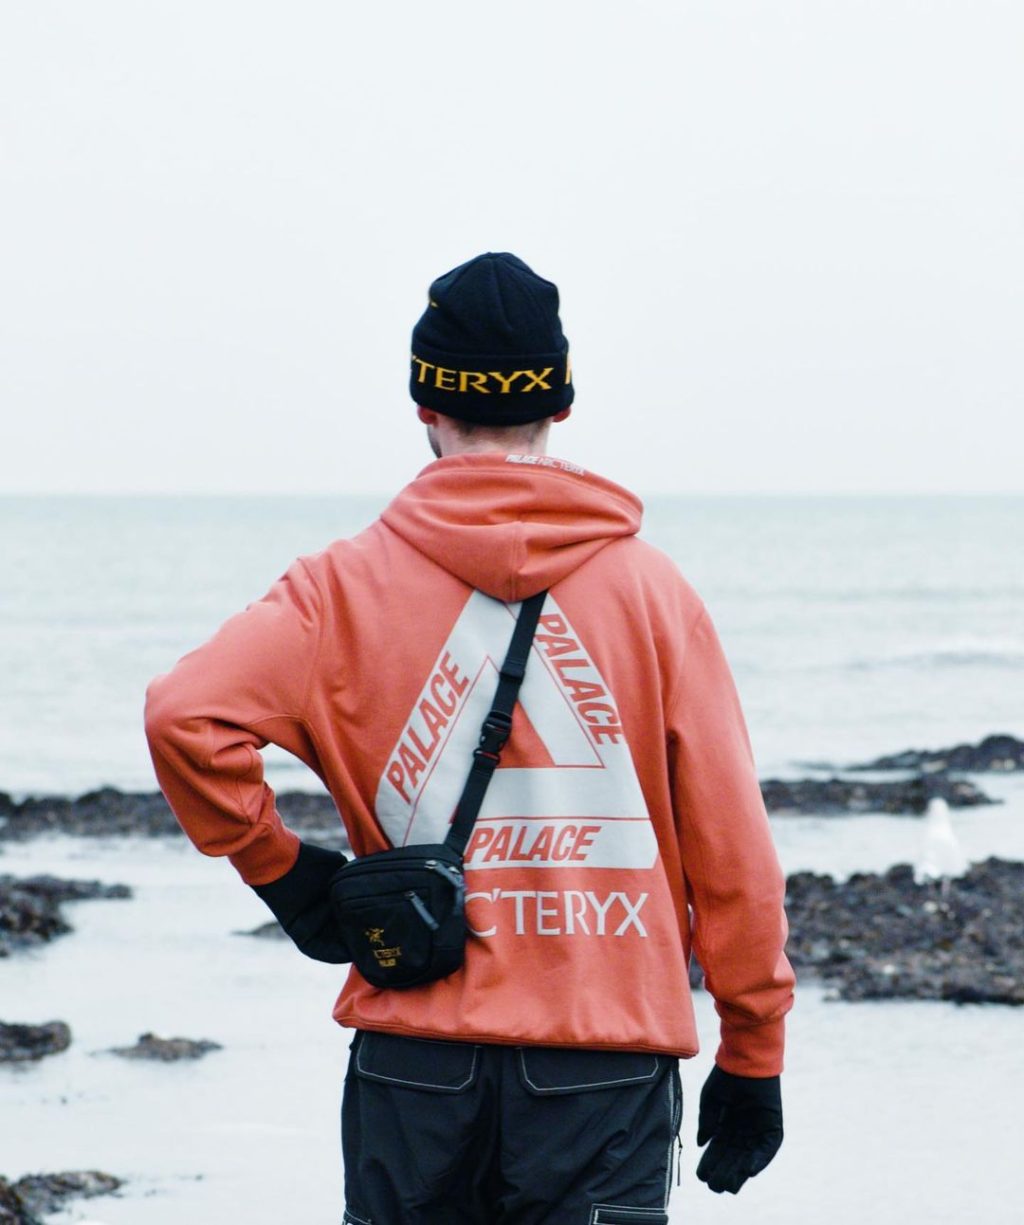 palace-arcteryx-2020-ultimo-collaboration-release-20201212-week3